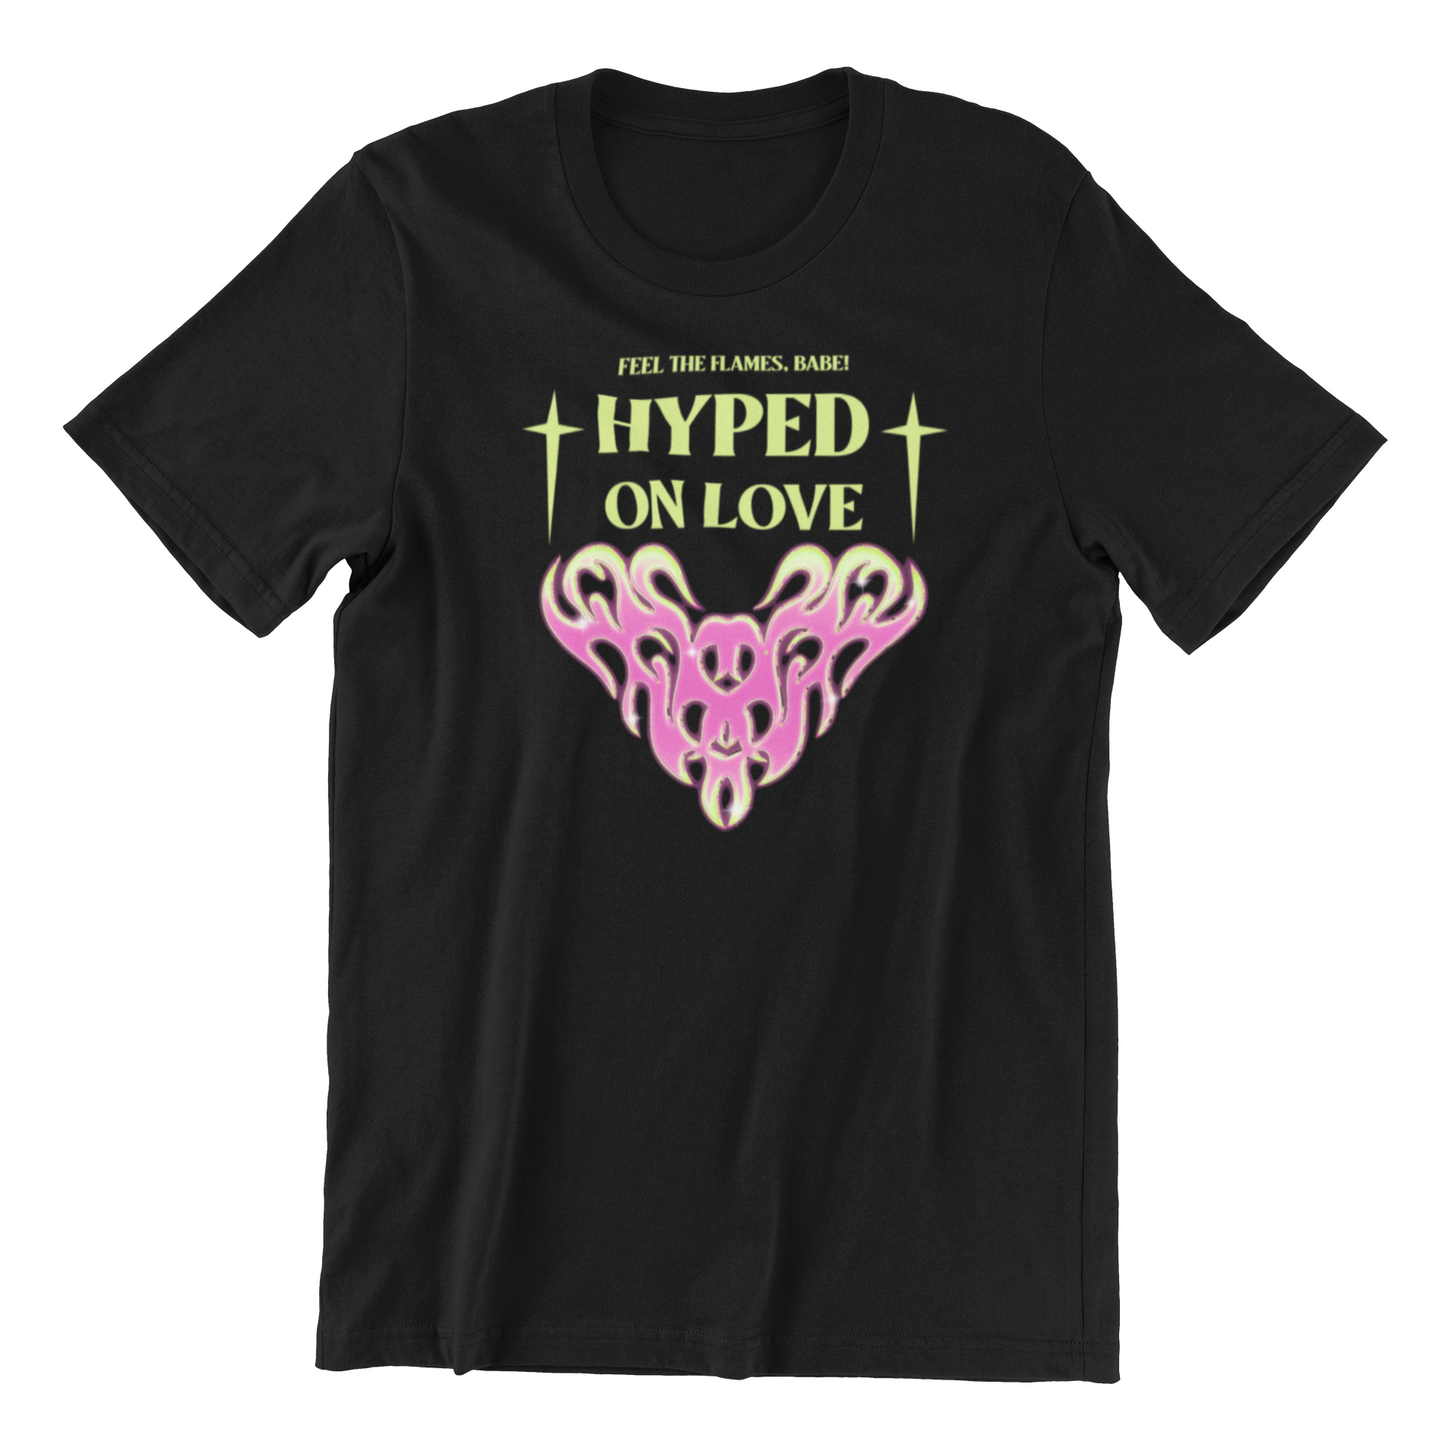 HYPED ON LOVE couple t-shirt